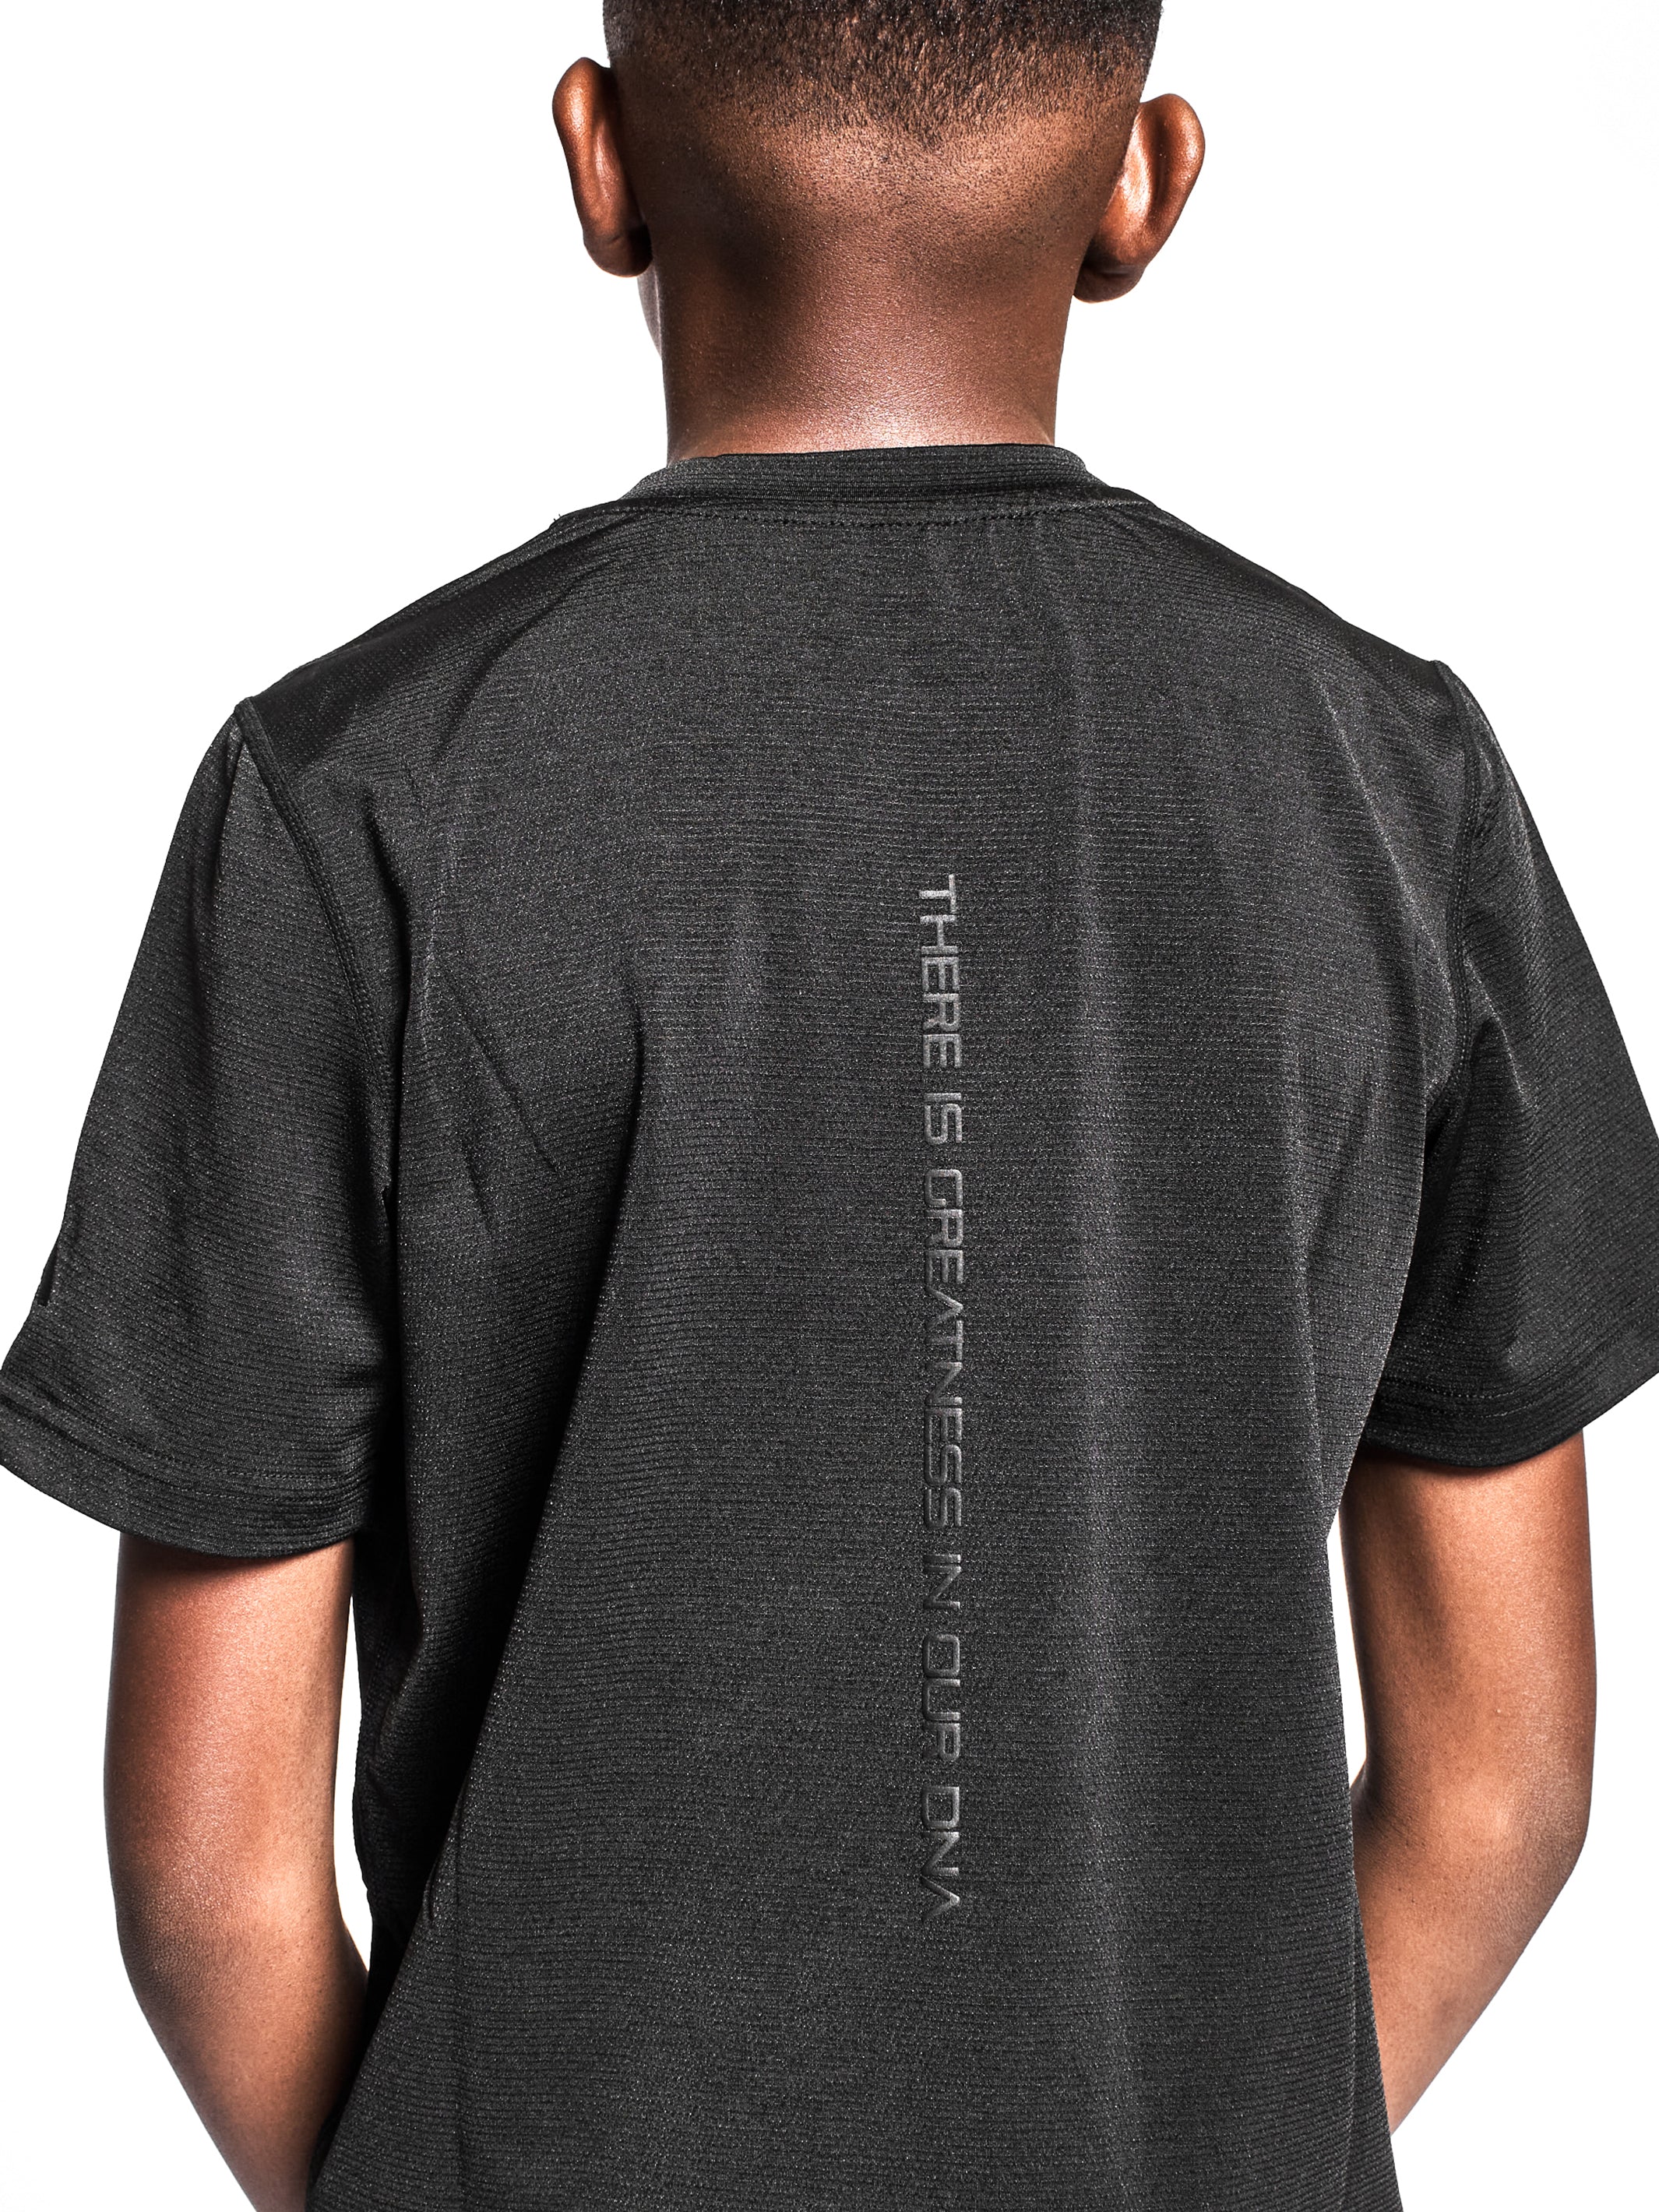 Youth Actively Black Performance Shirt